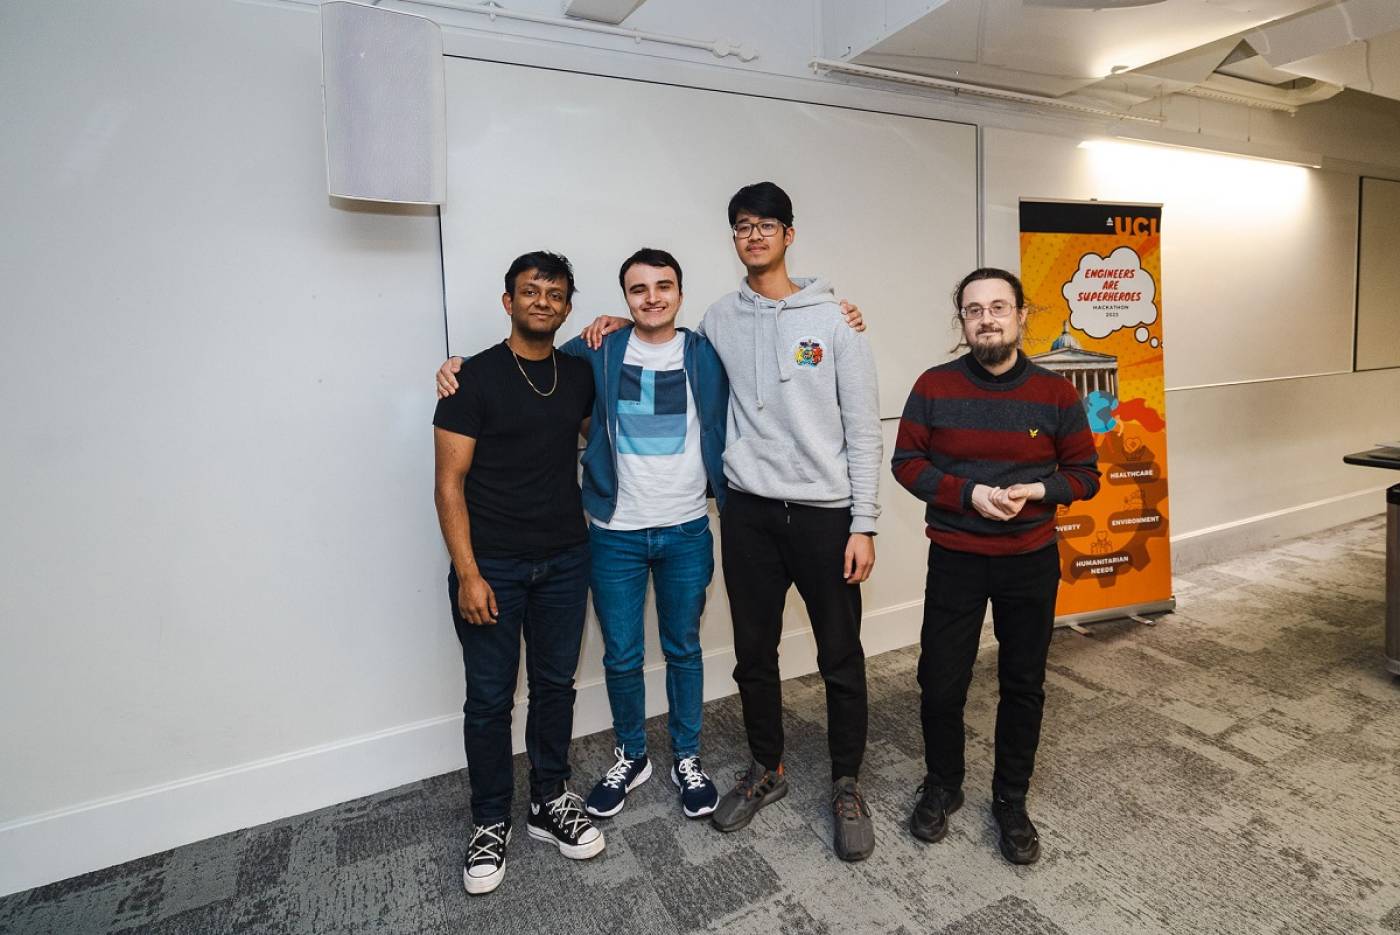 1st place team winners for UCL Engineers are Superheroes hackathon 